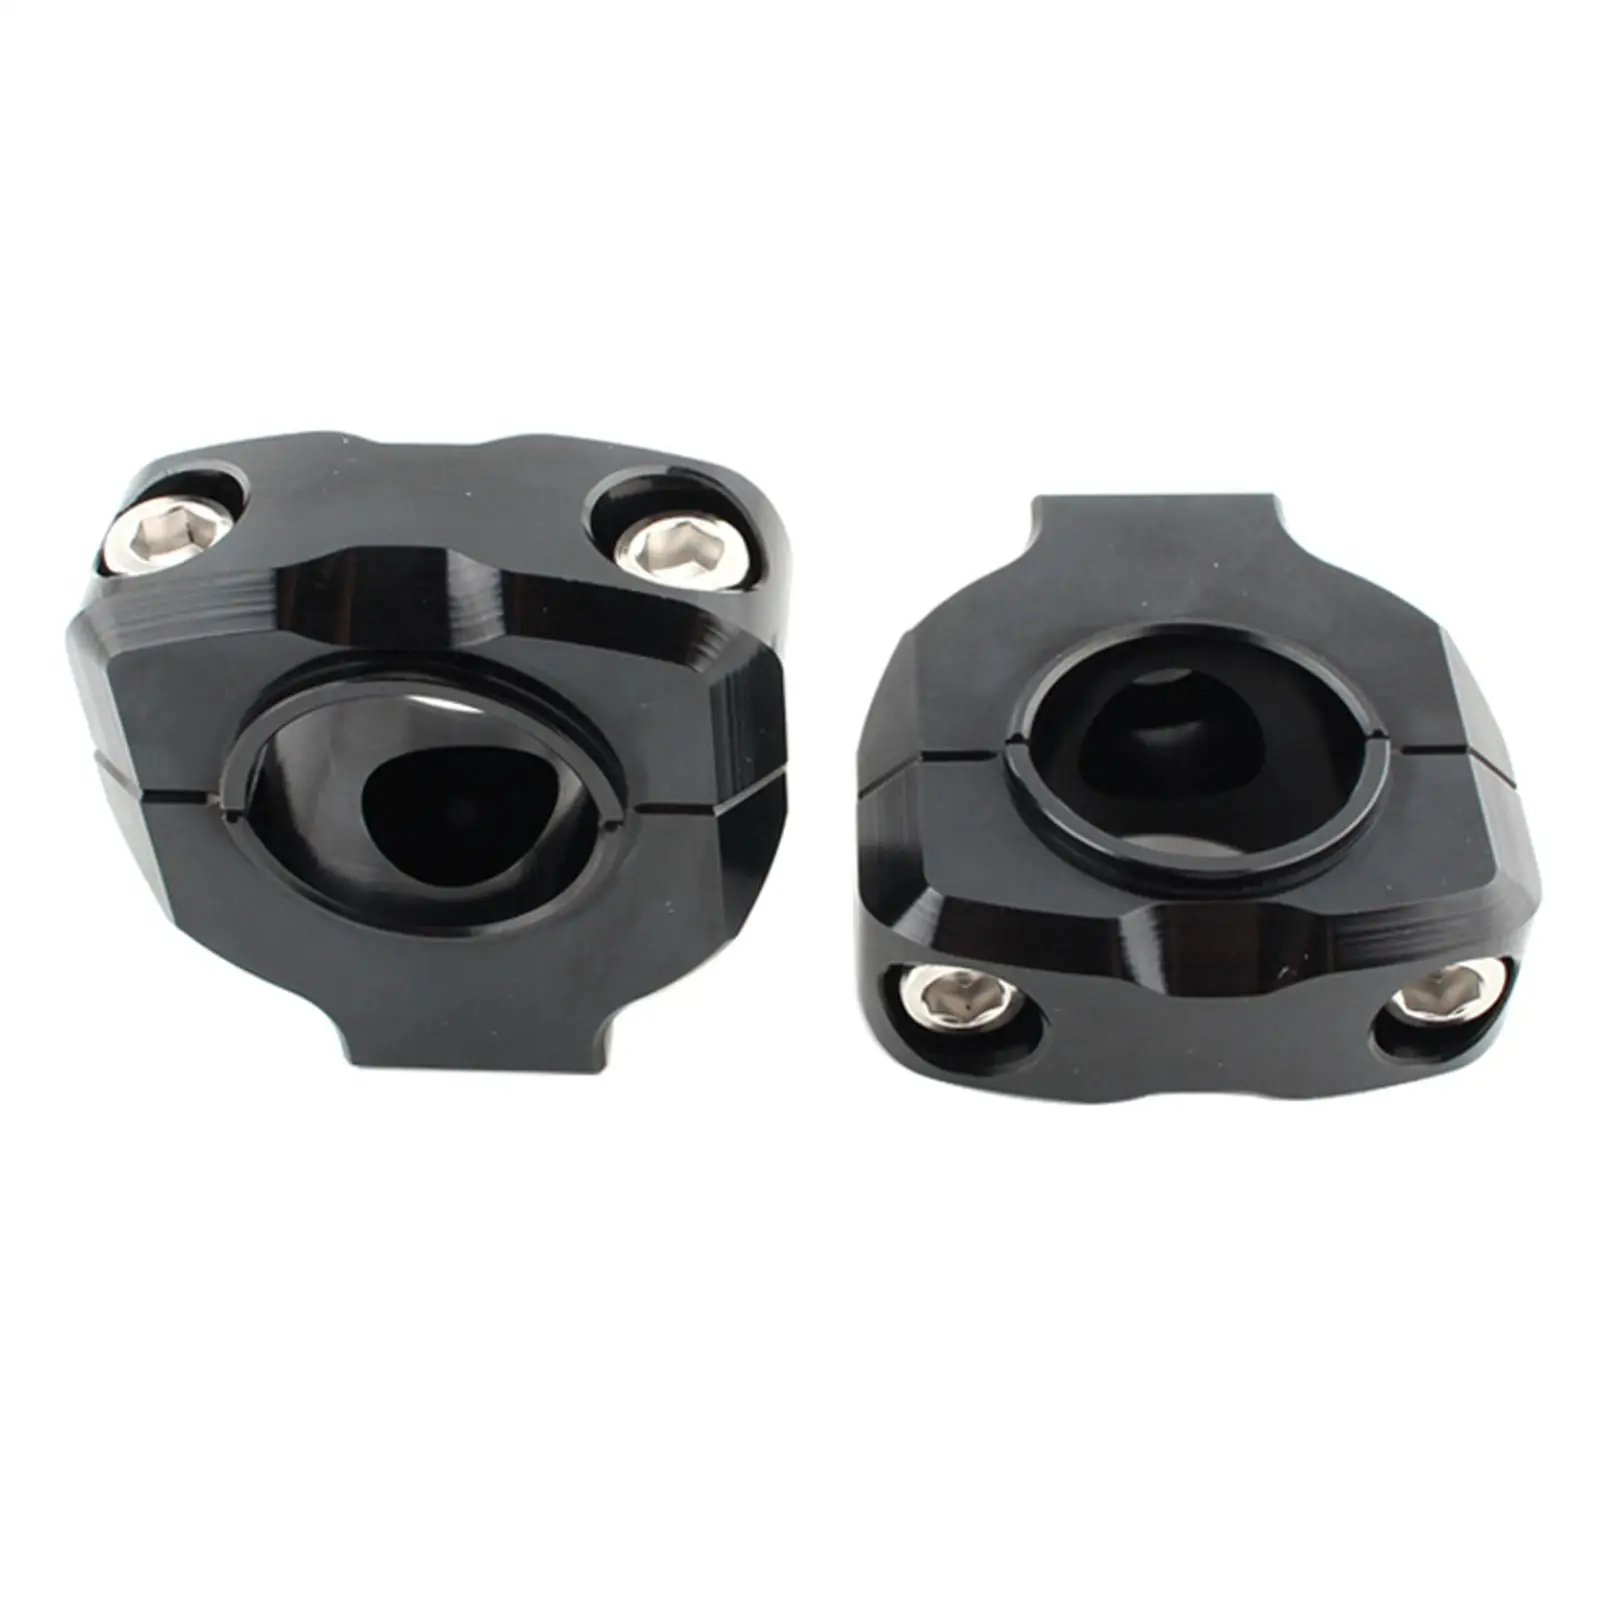 1 Pair Universal Motorcycle 28mm 1/8inch Handle Bar Riser Clamp  Lifter Bar Riser Adapter,   of your motorcycle